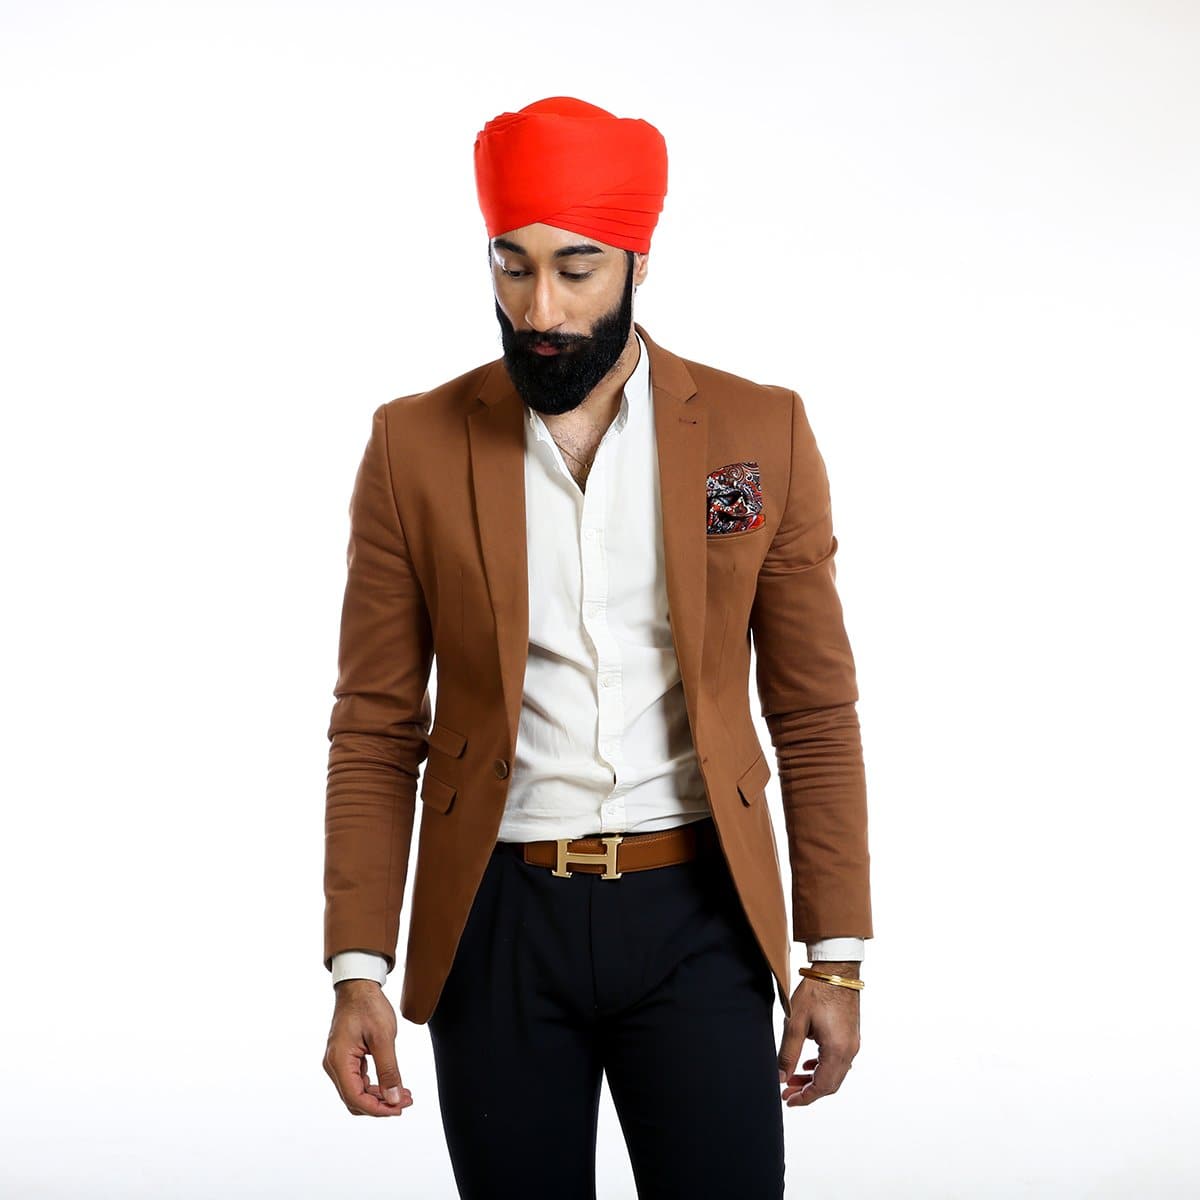 Firestorm Red Rubia Voile Turban - The Sardar Co